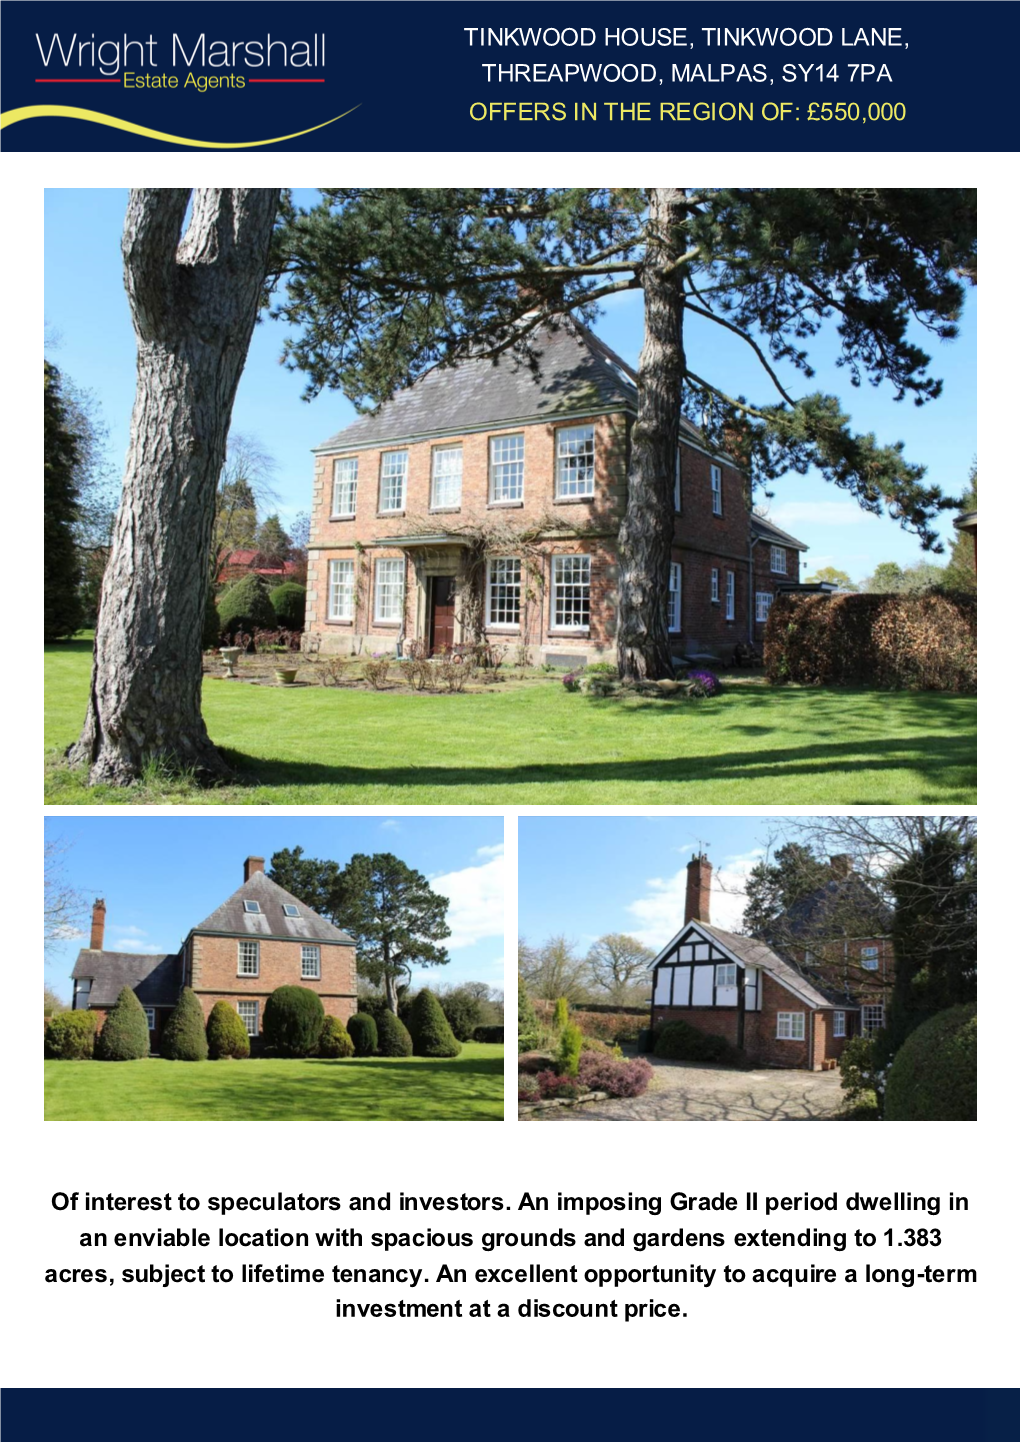 TINKWOOD HOUSE, TINKWOOD LANE, THREAPWOOD, MALPAS, SY14 7PA OFFERS in the REGION OF: £550,000 of Interest to Speculators